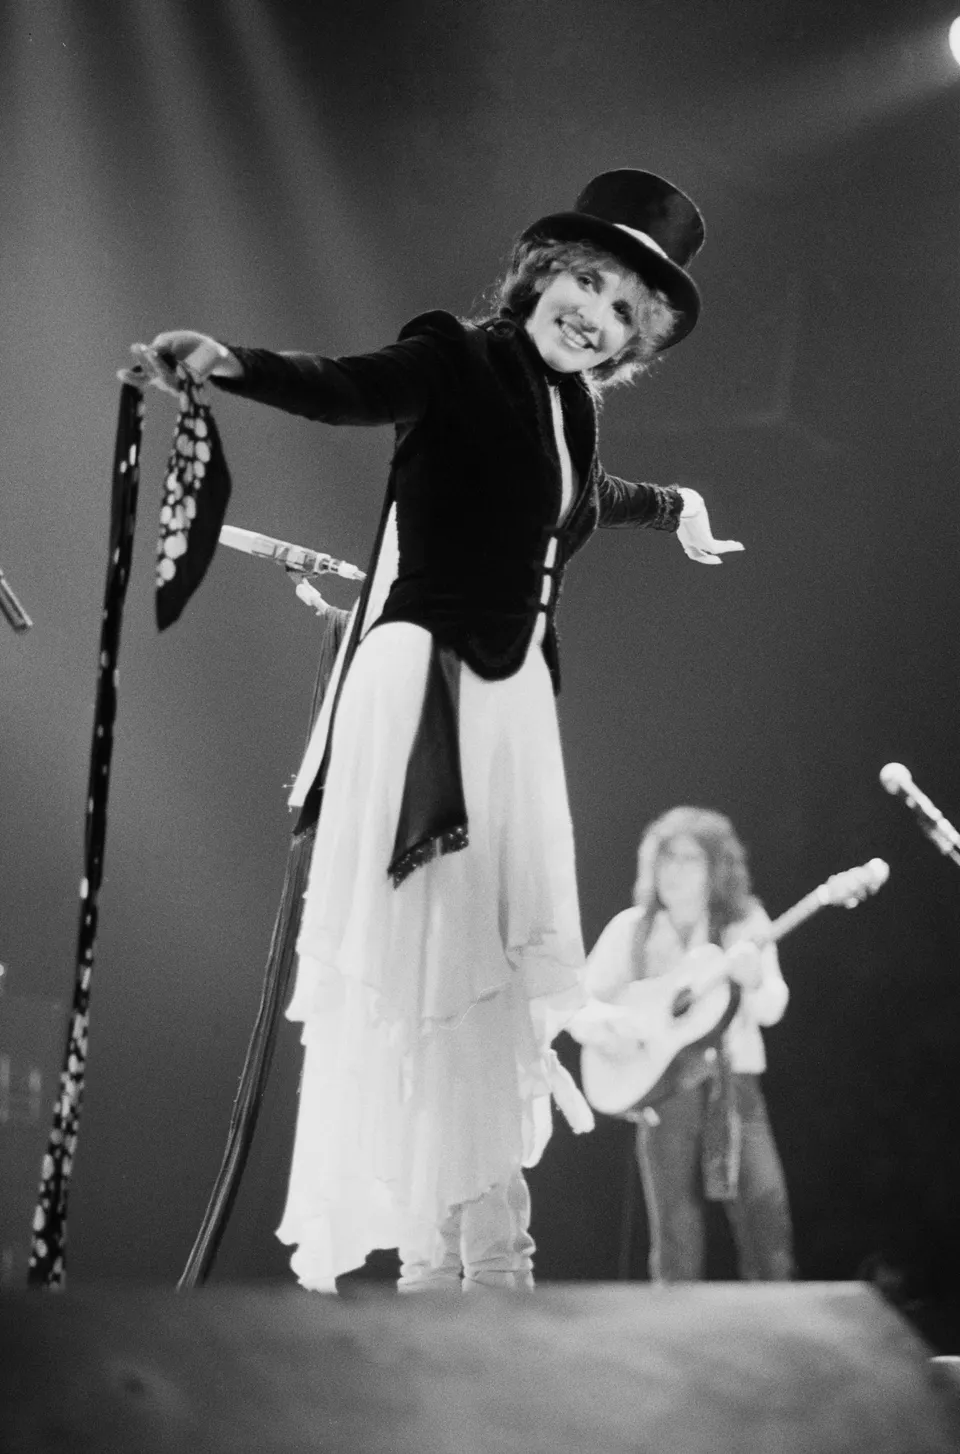 Photos Of Stevie Nicks' Style Evolution, From '70s Songbird To Music Icon |  HuffPost Life